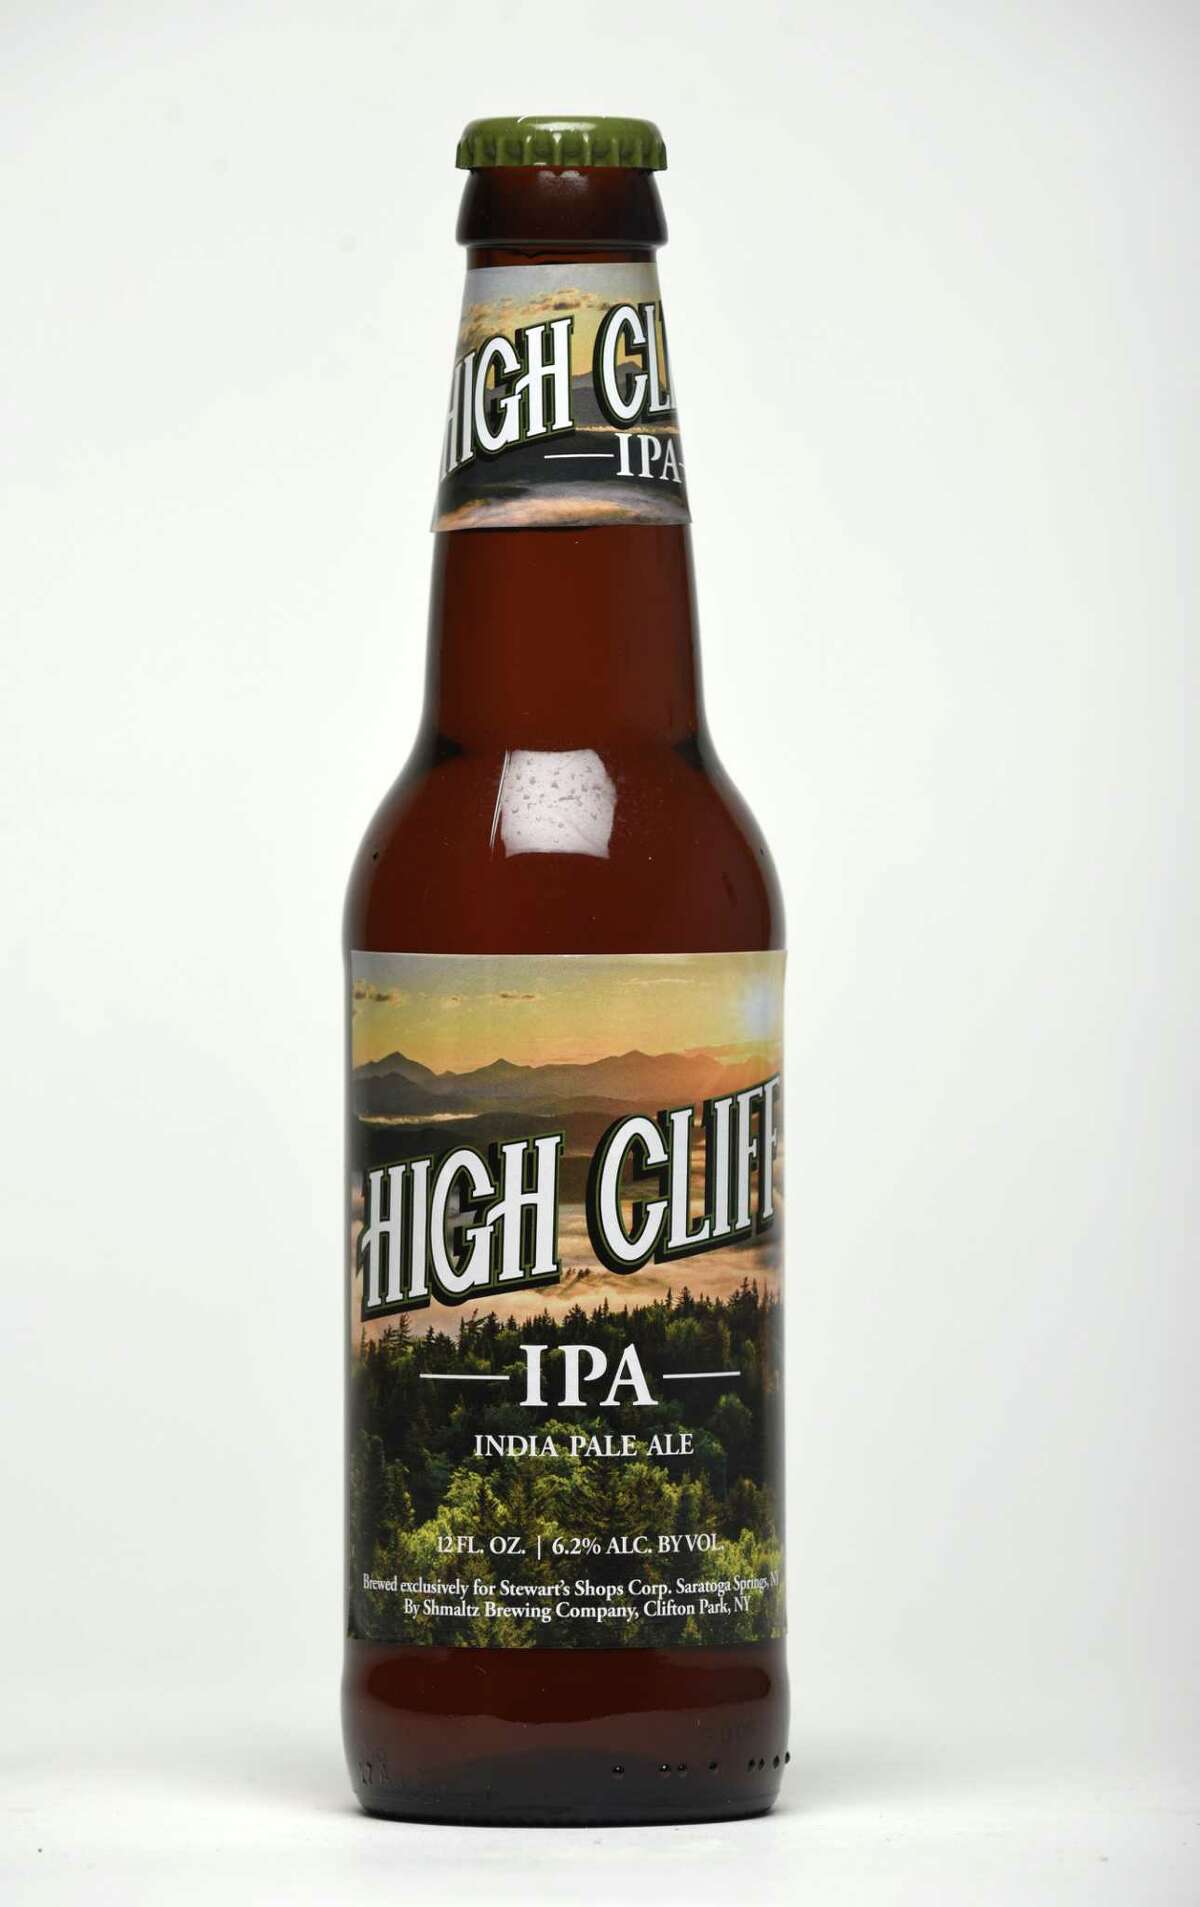 High Cliff IPA, a beer made by Shmaltz Brewing Company exclusively for Stewart's Shops, on Wednesday, Nov. 8, 2017, at the Times Union in Colonie, N.Y. (Will Waldron/Times Union)